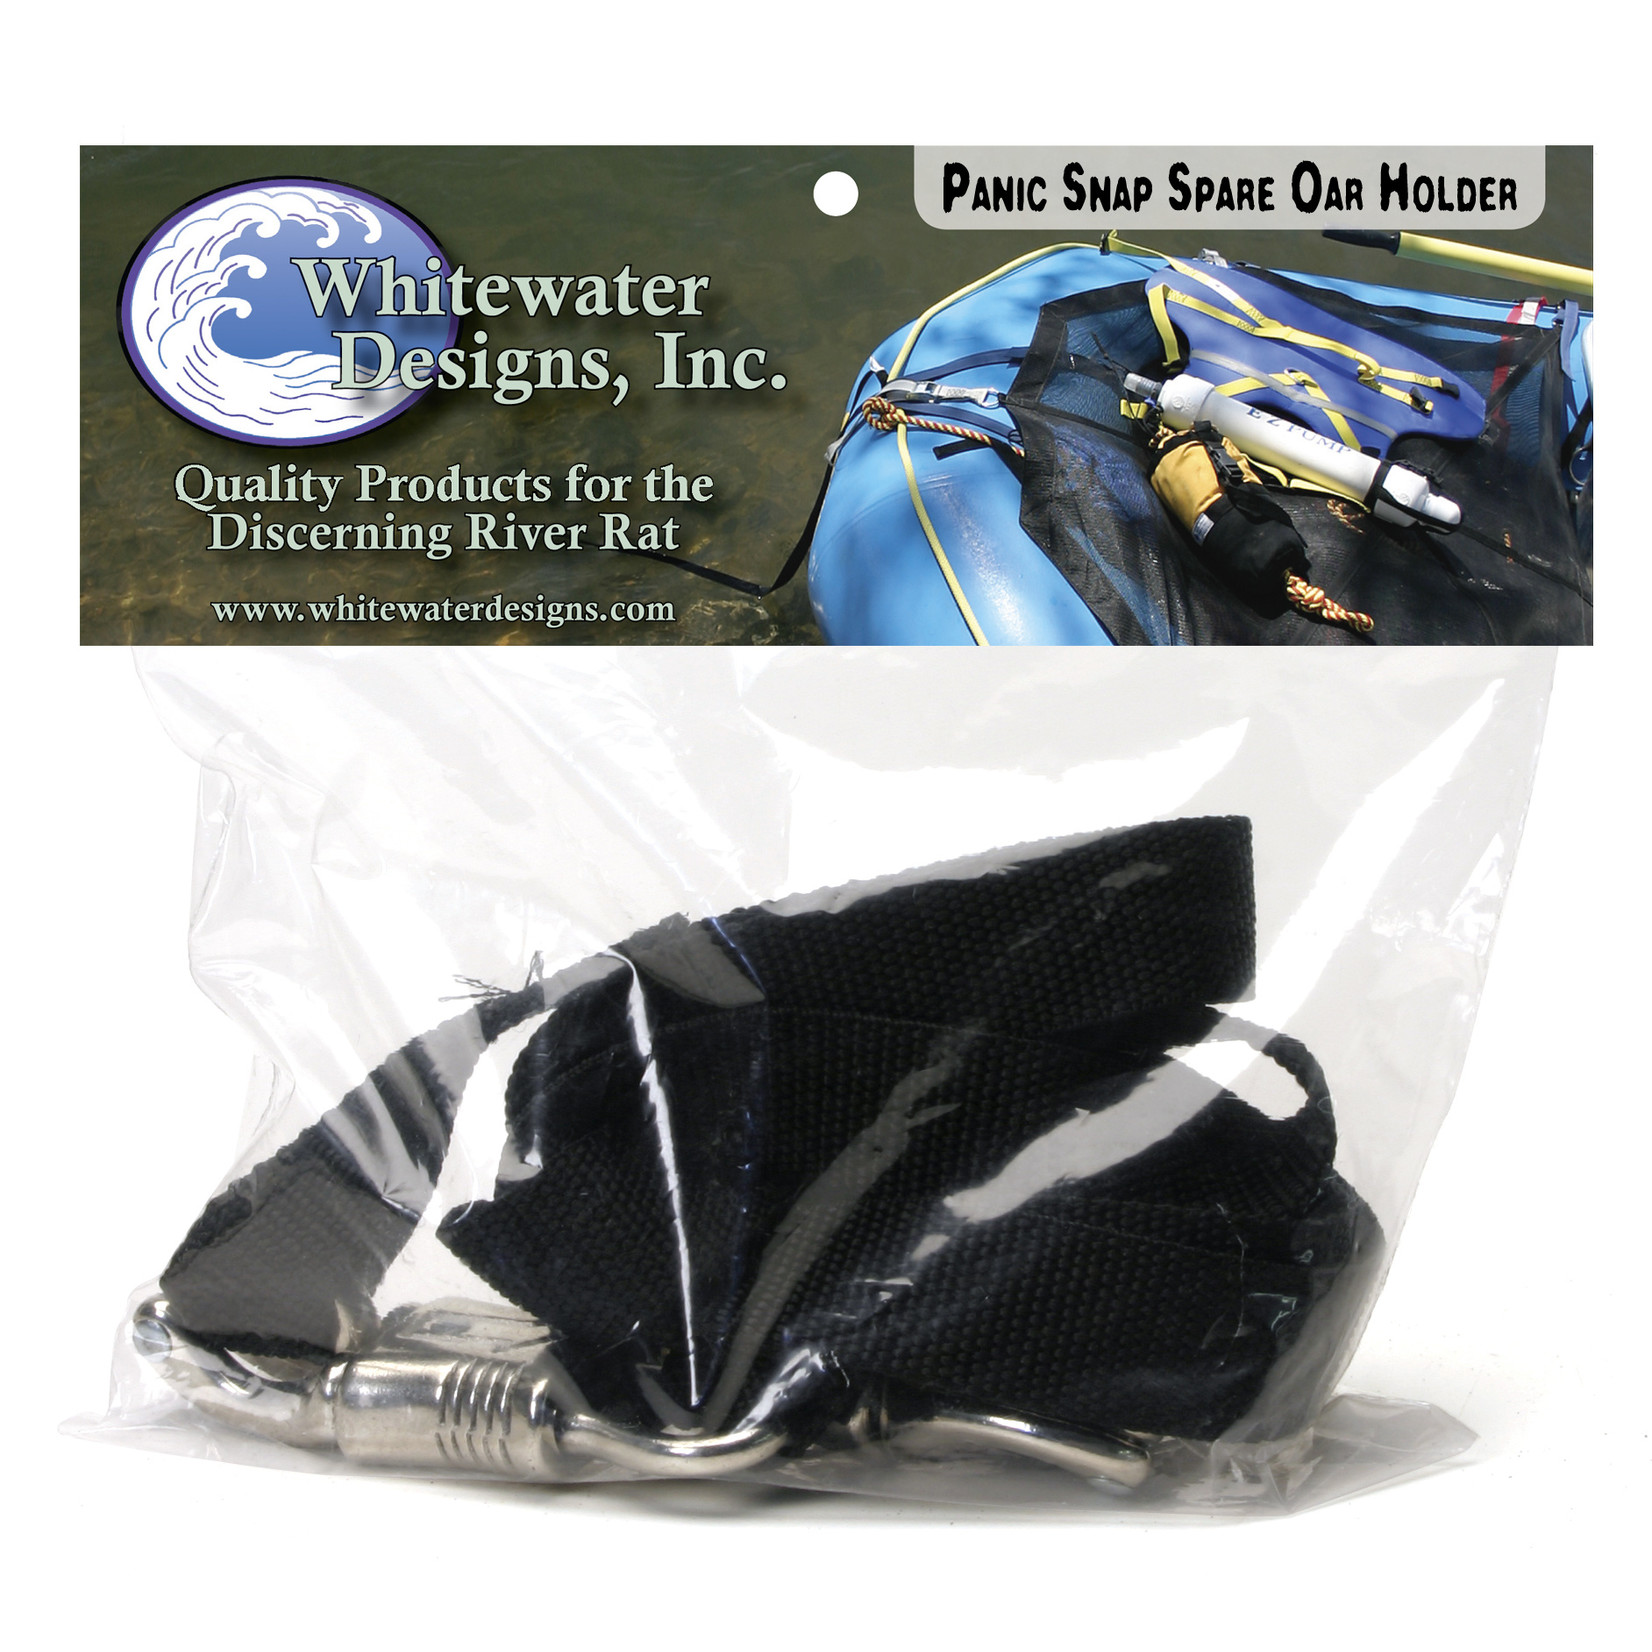 Whitewater Designs Spare Oar Holder w/Panic Strap, pair